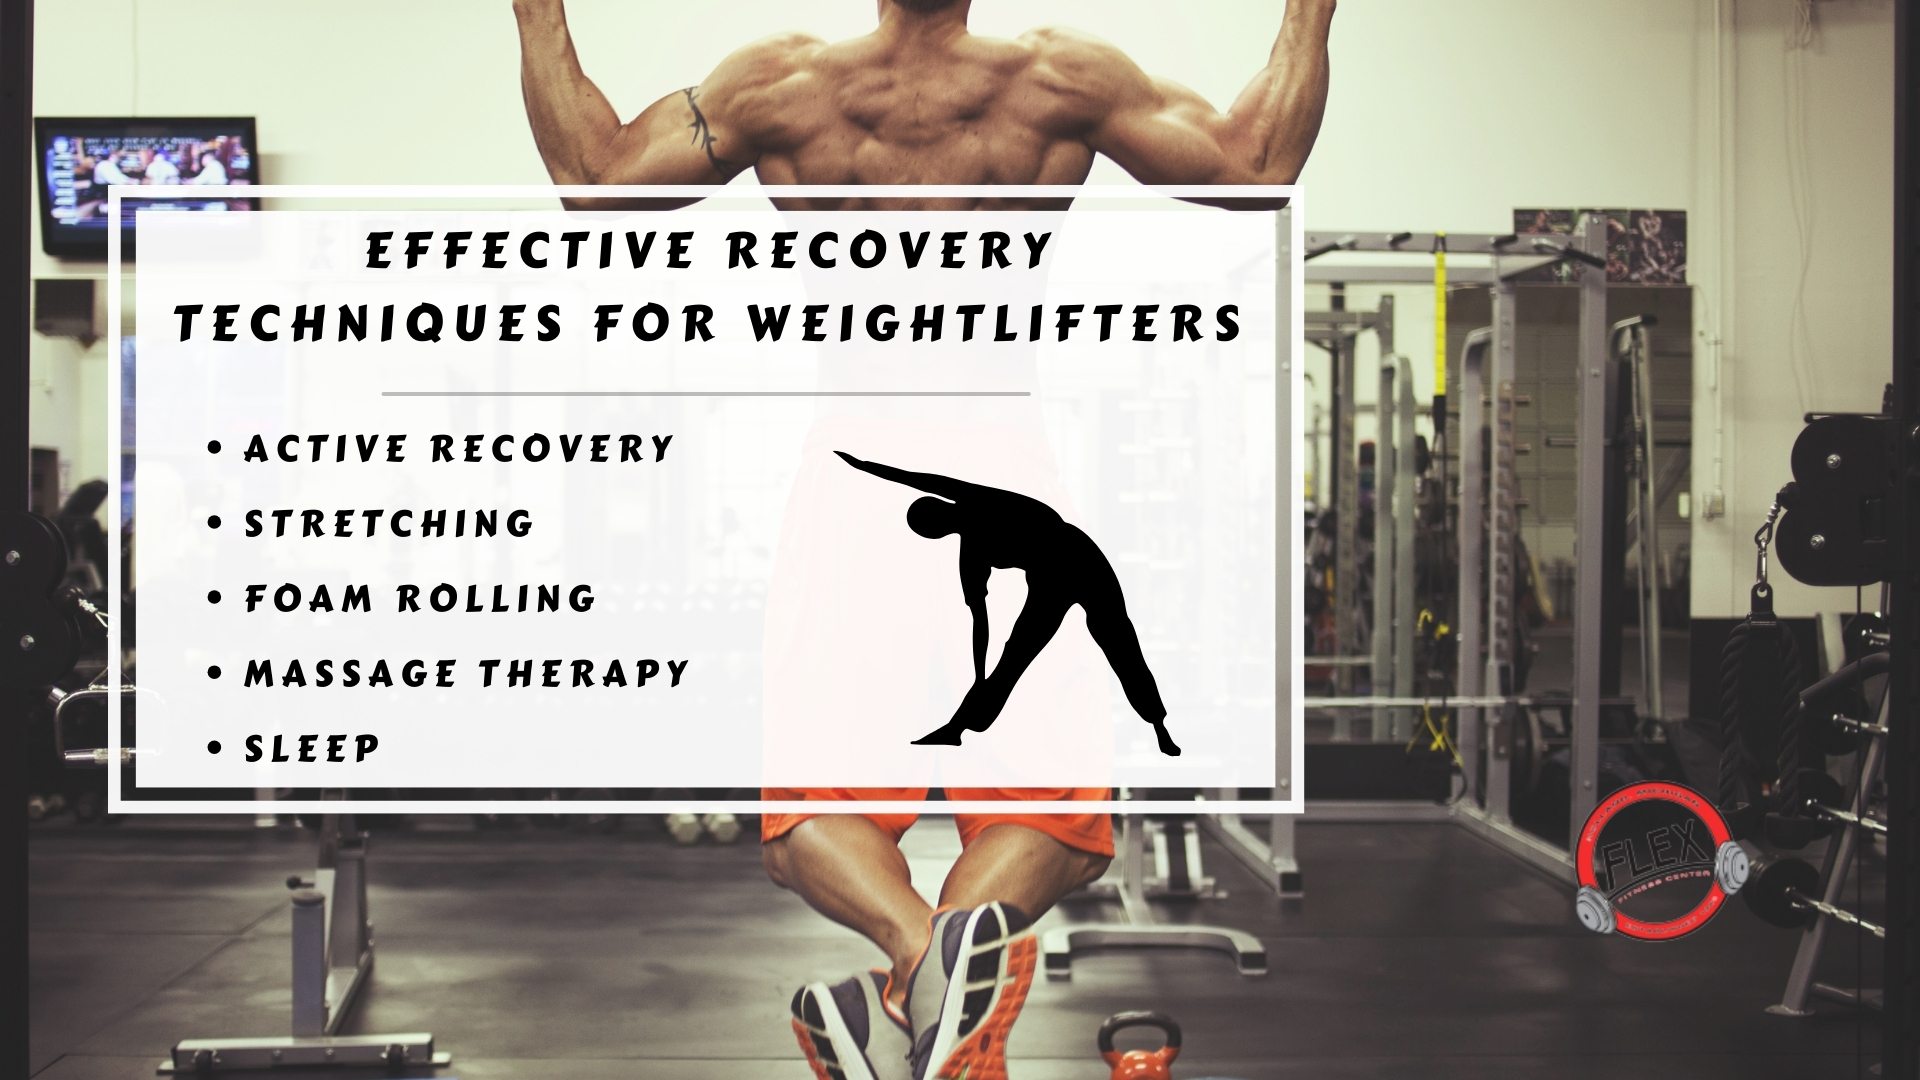 Infographic image of effective recovery techniques for weightlifters